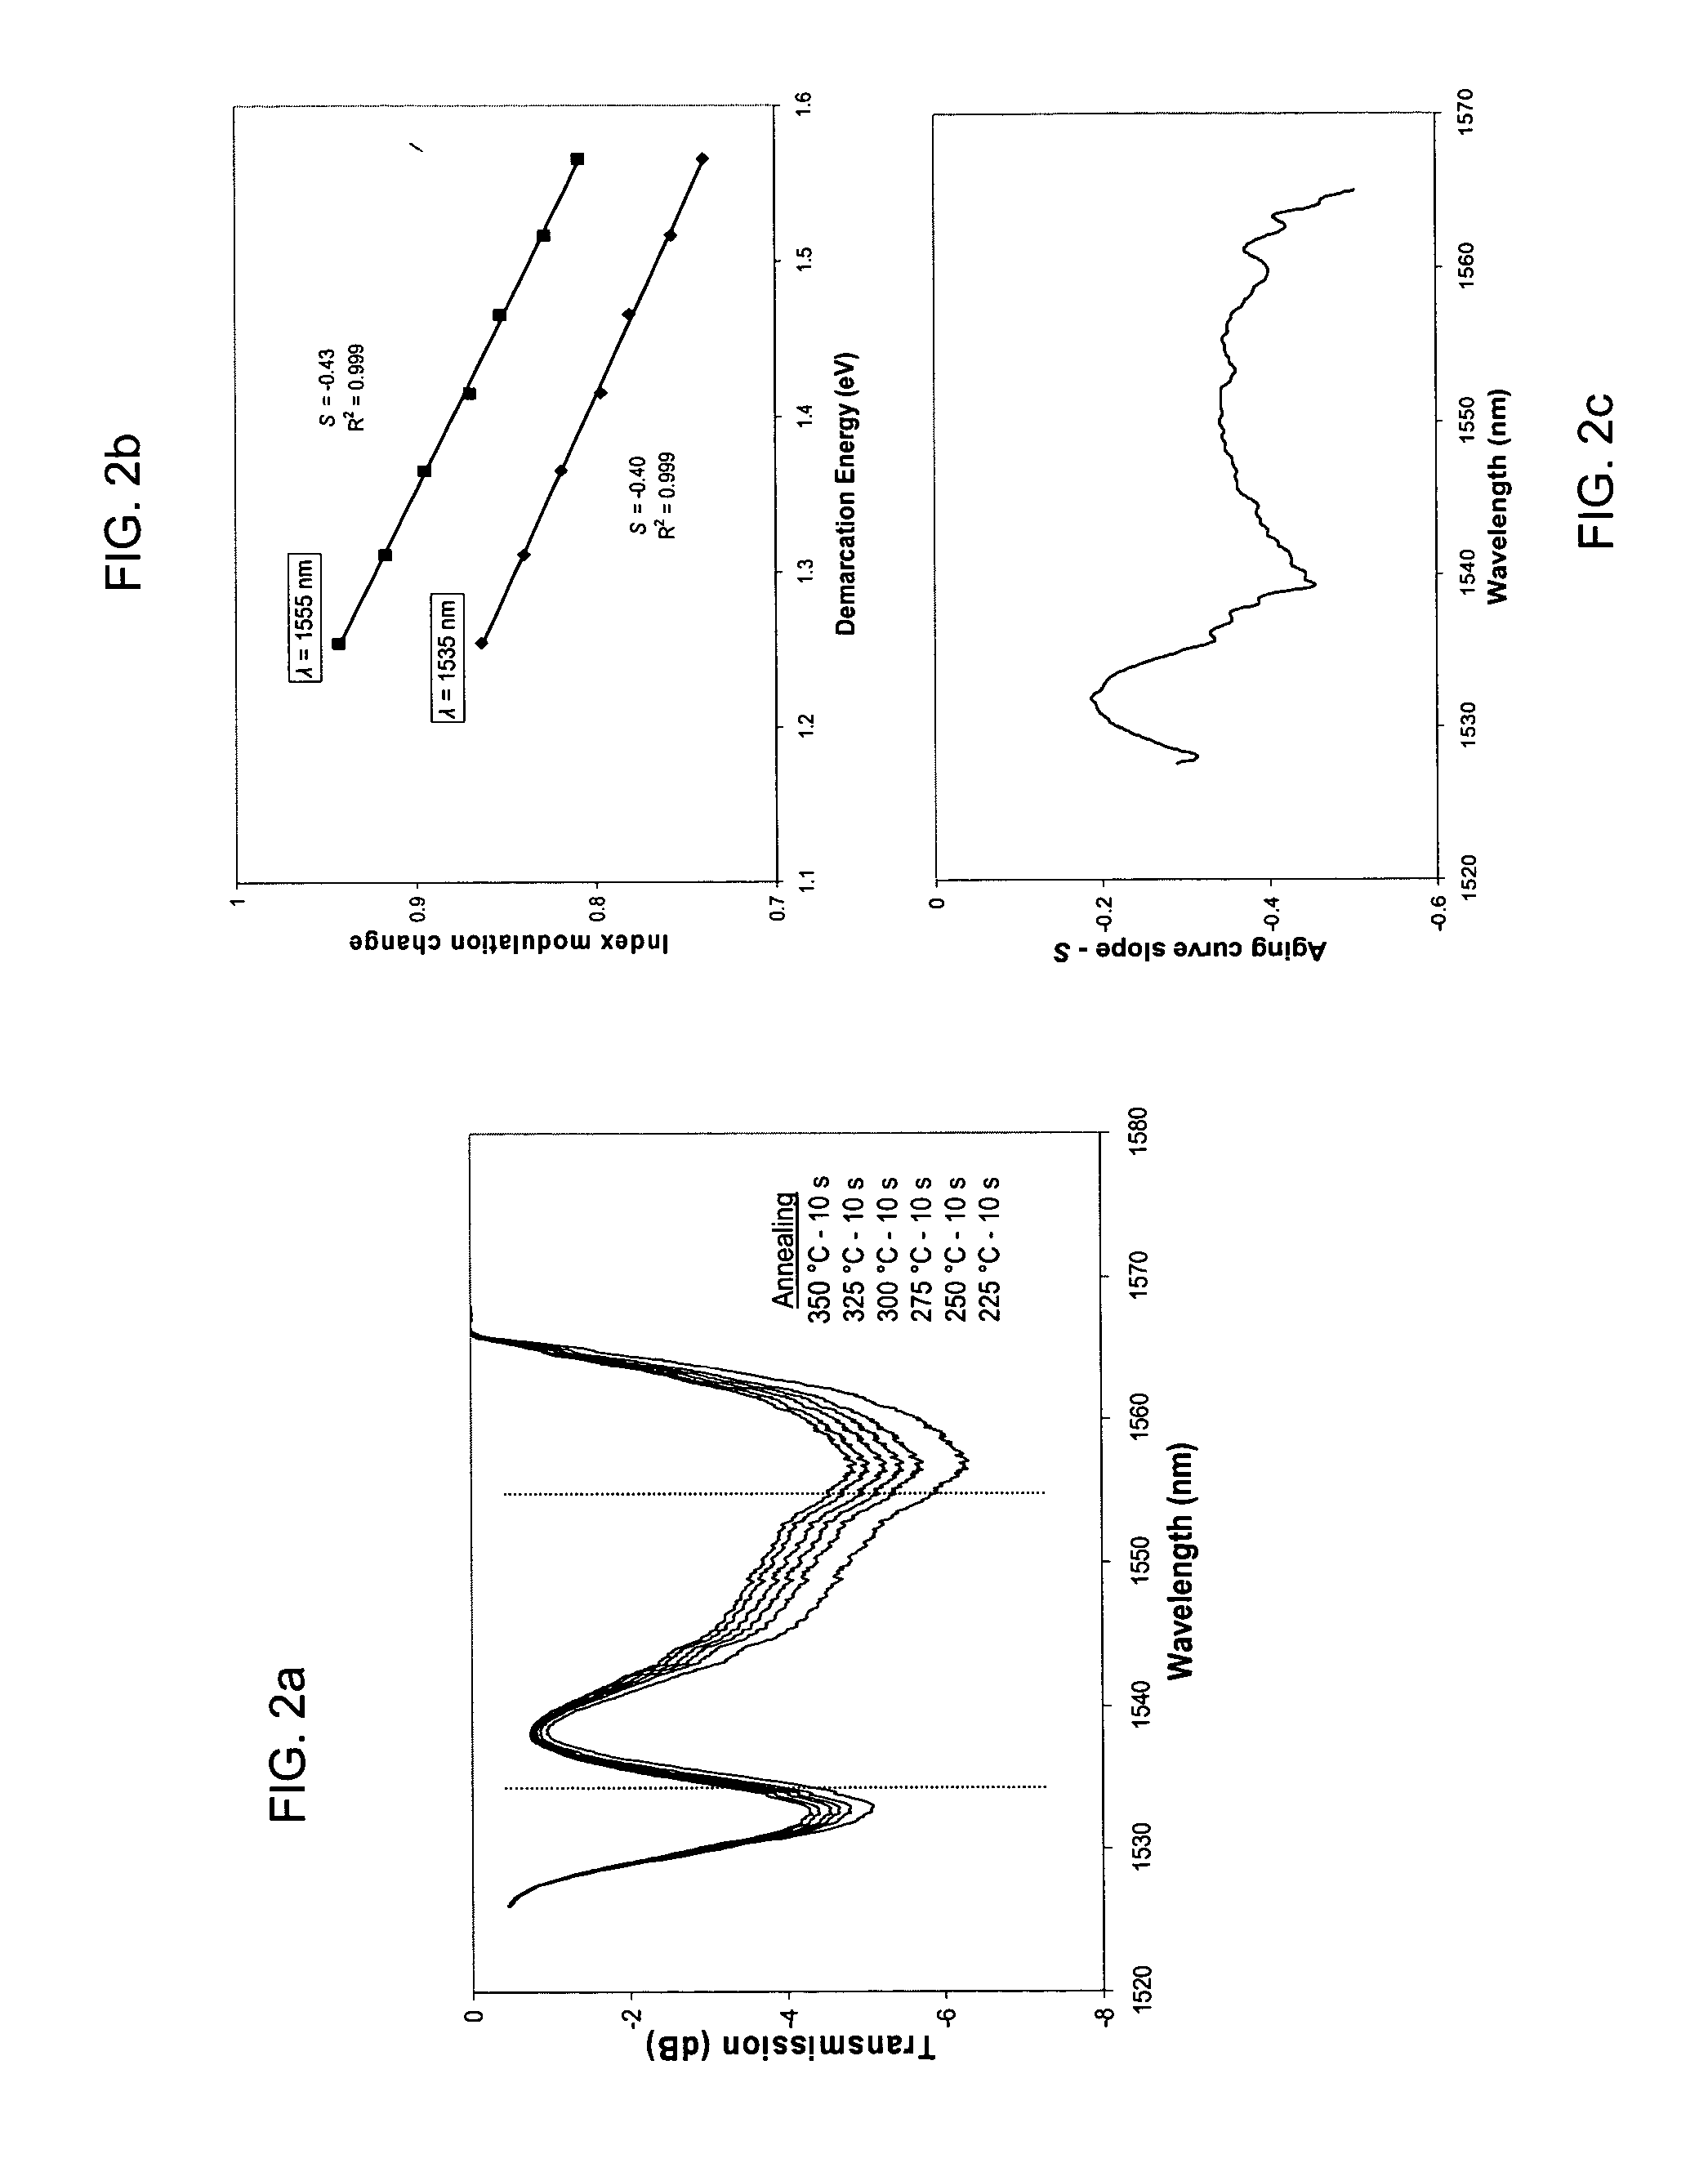 Method for manufacturing a FBG having improved performances and an annealing-trimming apparatus for making the same